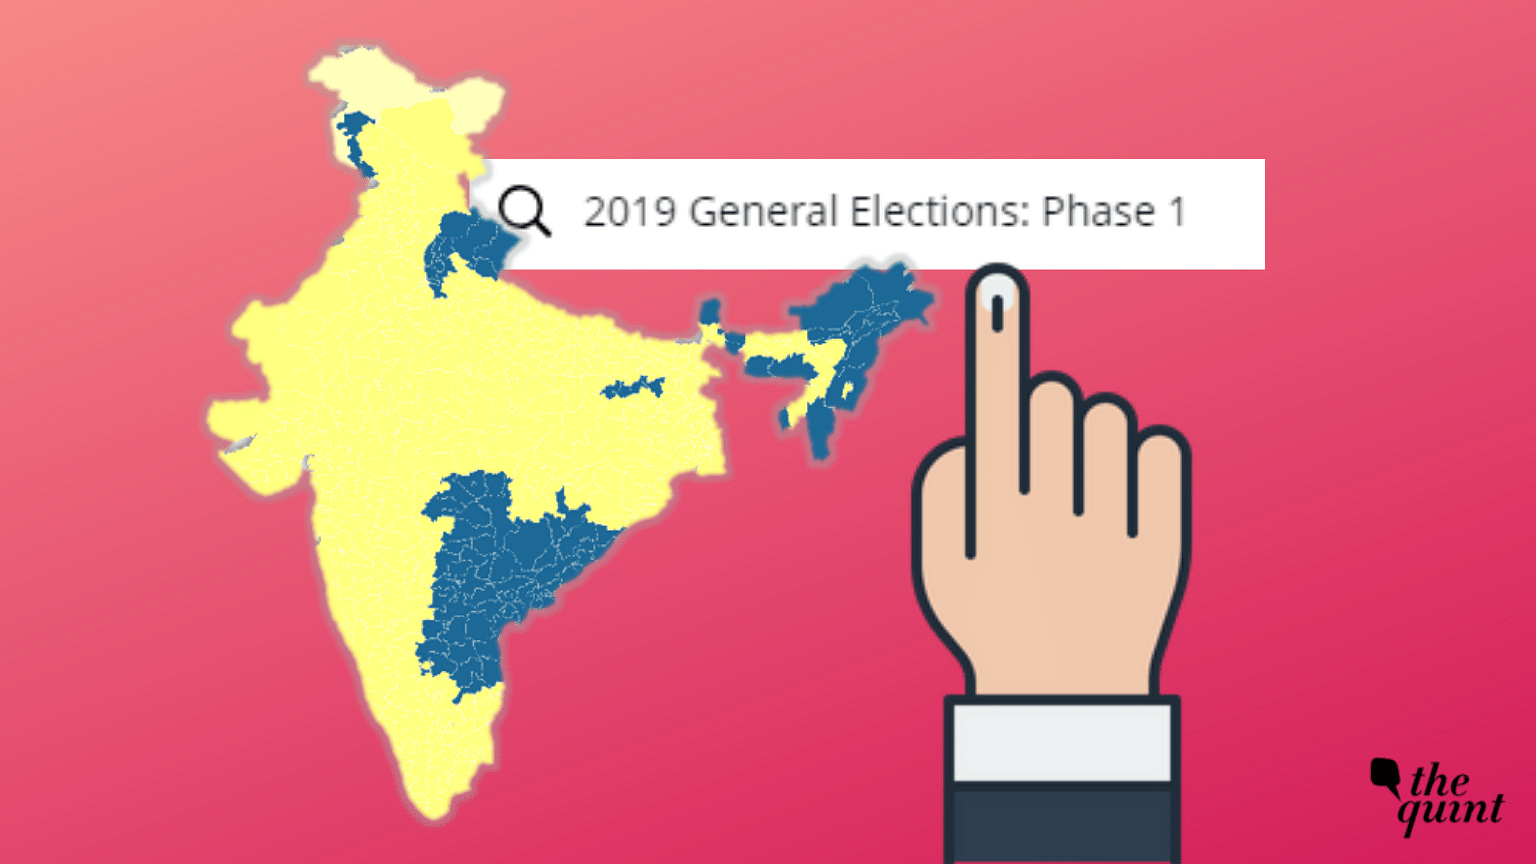 India will vote its next government by voting in seven phases across all states.